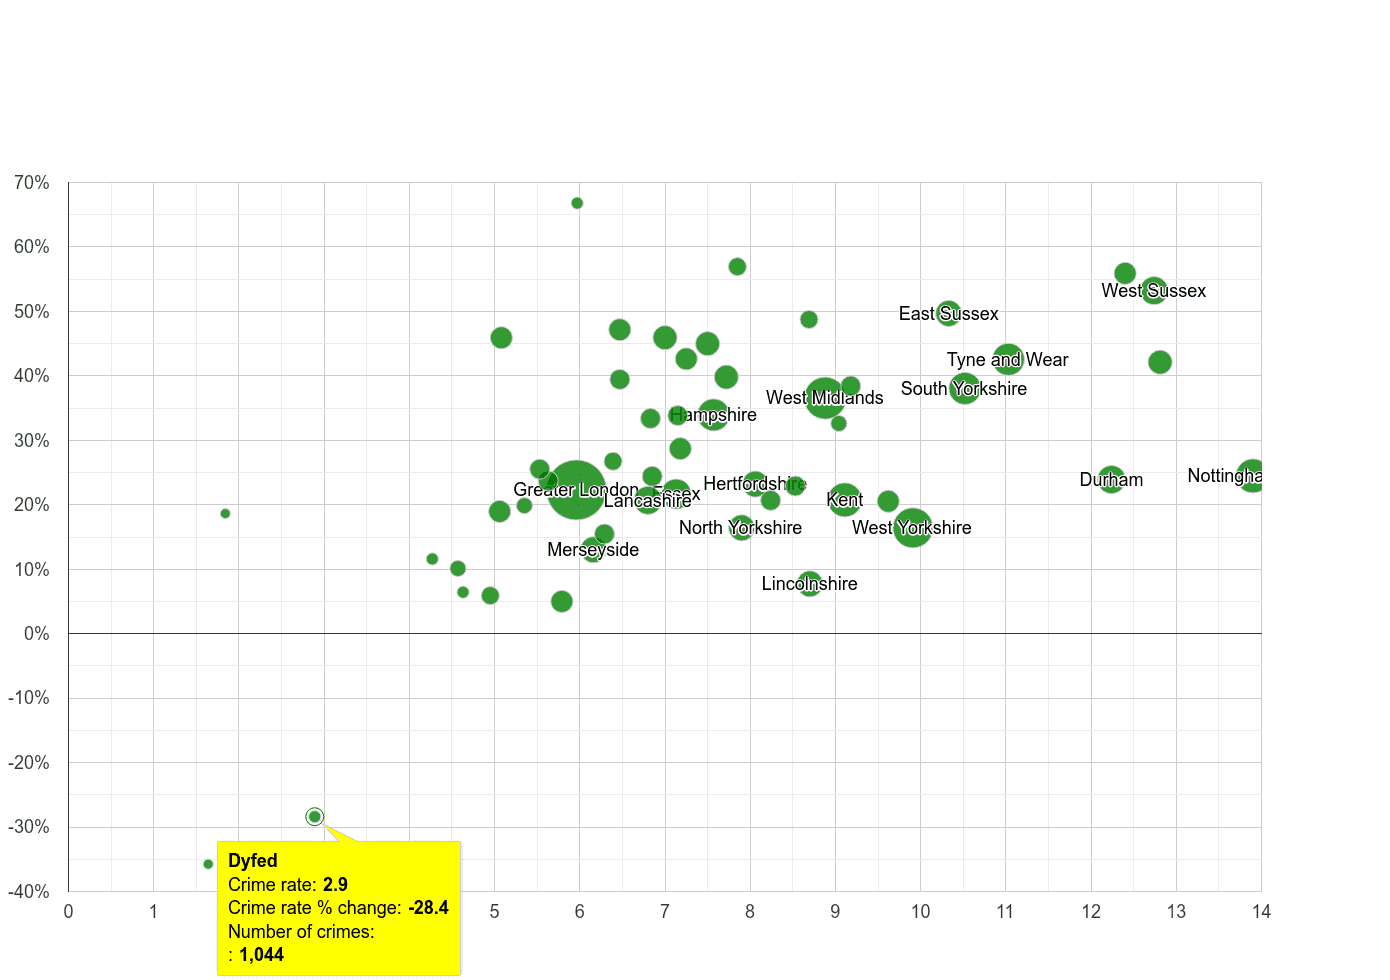 Dyfed shoplifting crime rate compared to other counties